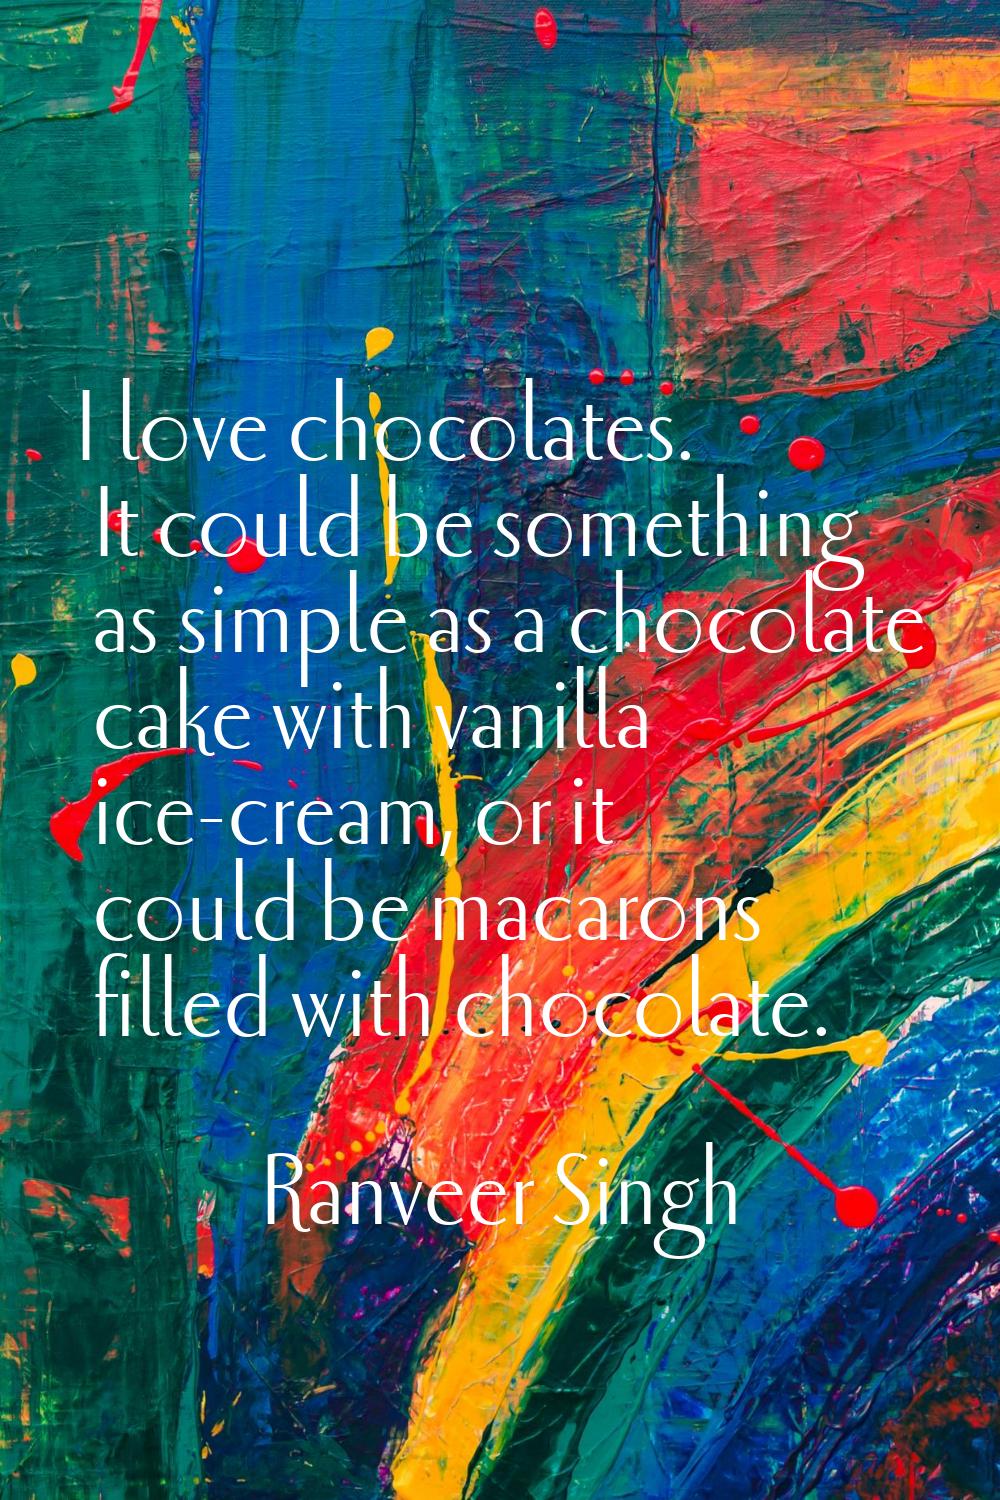 I love chocolates. It could be something as simple as a chocolate cake with vanilla ice-cream, or i